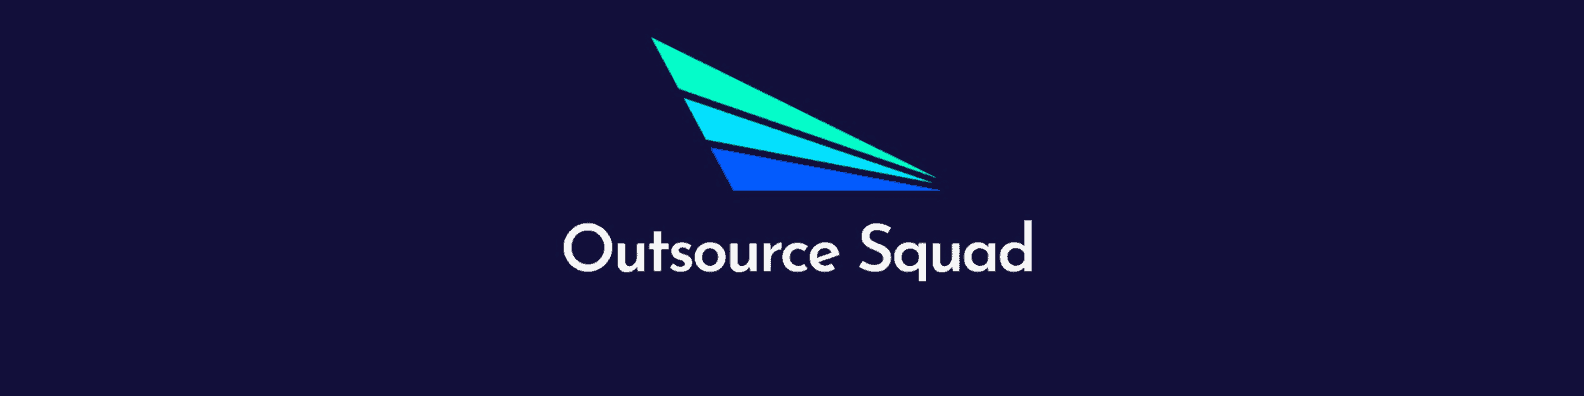 Outsource-Squad-Newwwwww.png